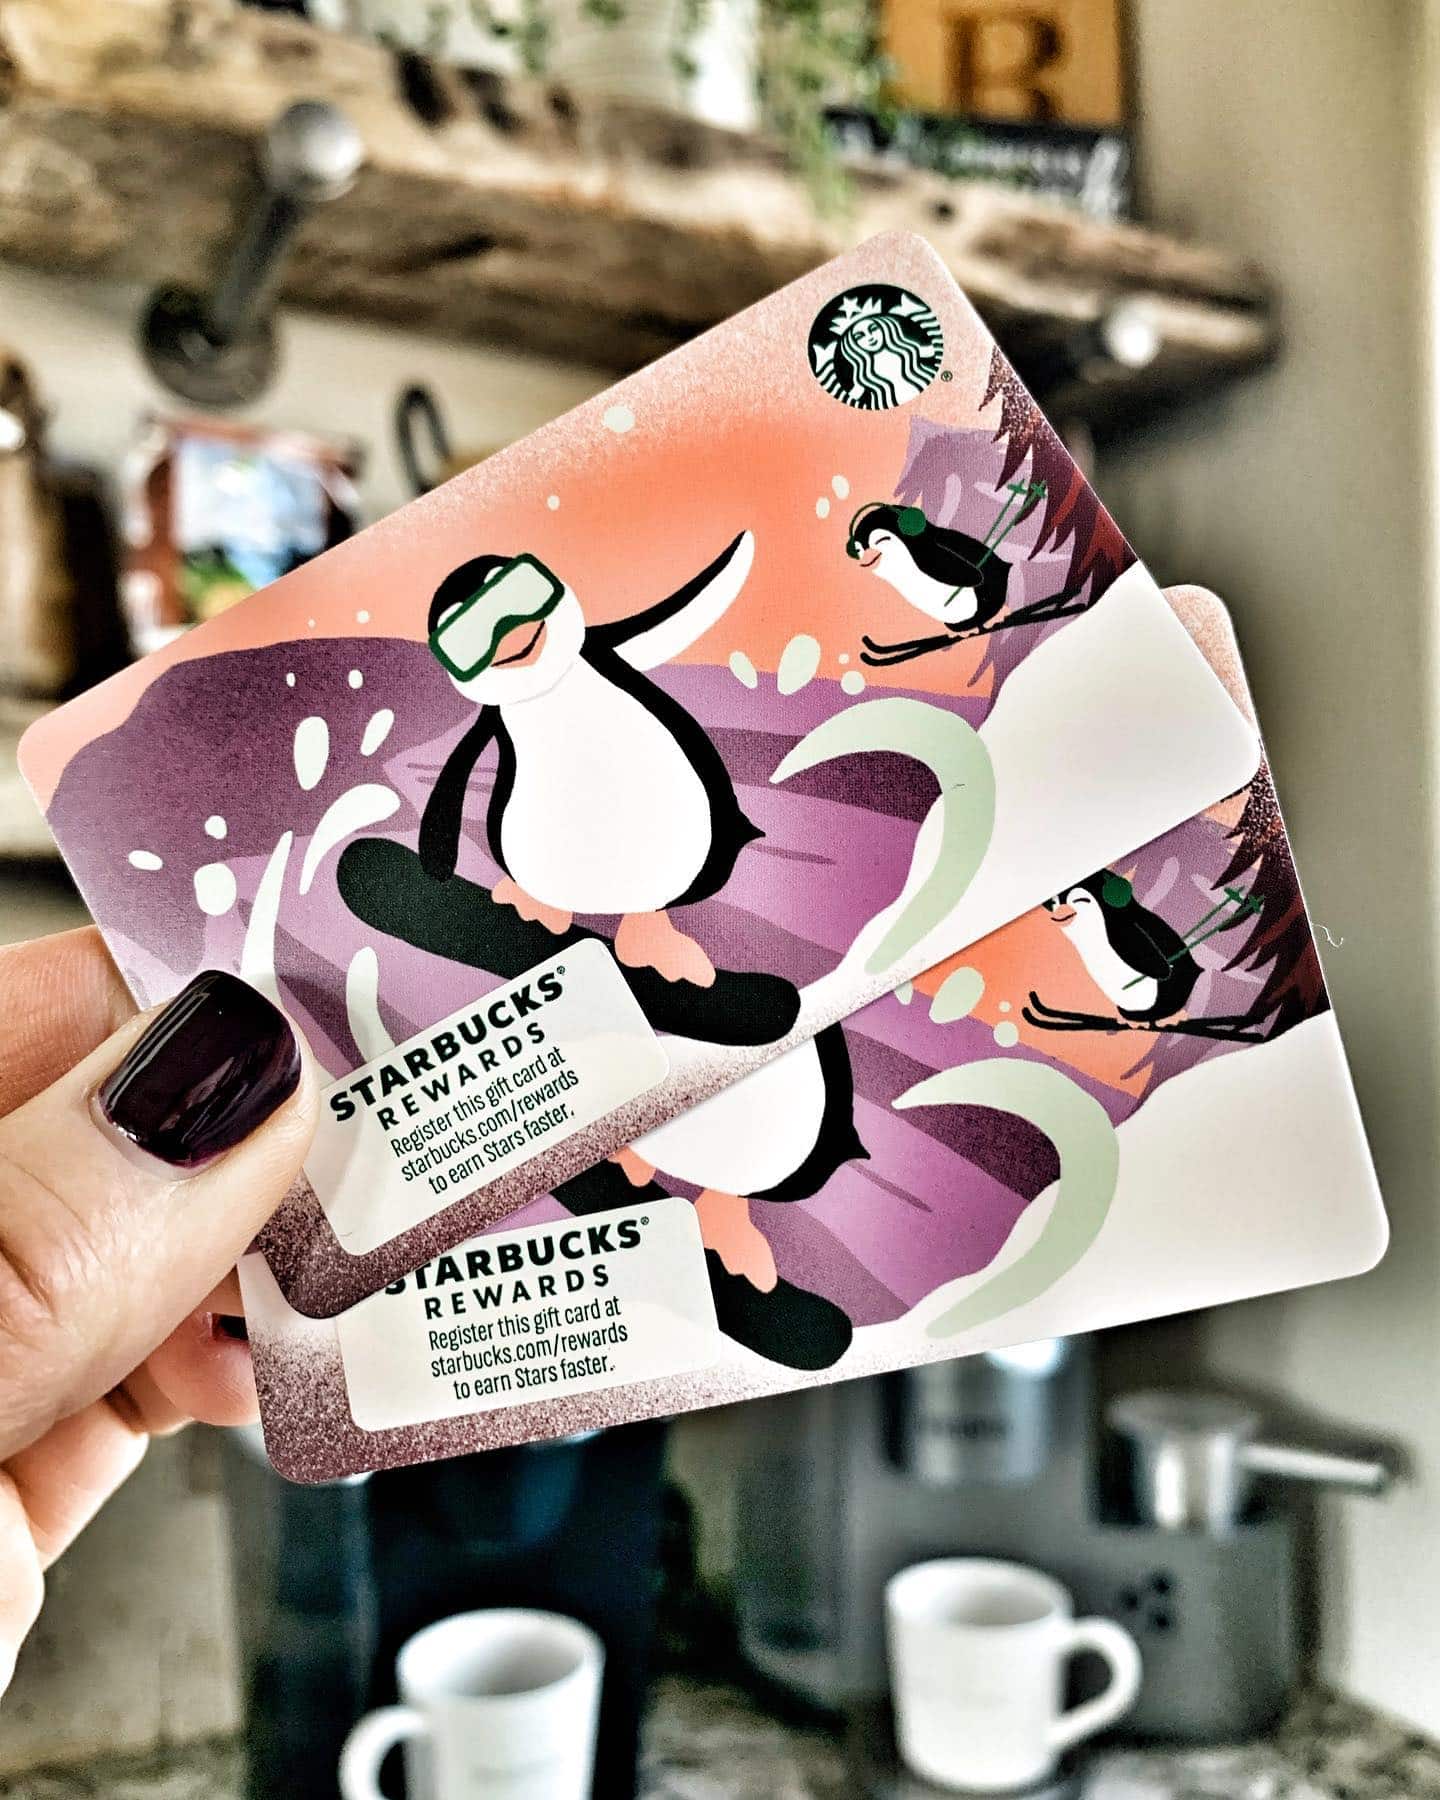 🛑CLOSED🛑💫NEW YEAR NEW GIVEAWAY!💫

It’s always a little sad when the Christmas season🎄is past us, BUT I gotchu!!🥰 

Plus, the newness and potential of 2022 is something I can get behind so let’s start it off right.🥳

Okay, you know the drill😎…I have 2 Starbucks cards I can’t wait to send to 2 of you!☕️

🔲EASY PEASY RULES🔲
1️⃣Follow @happihomemade 👈🏼‼️This is the ONLY HappiHomemade acct‼️Stupid spammers have set up fake HH accts don’t follow them‼️
2️⃣Like this photo❤️
3️⃣Tag a friend or 10💁🏻‍♀️in the comments, there’s no limit. BUT make sure EACH tag is in a SEPARATE comment!🤍

🥳I will be choosing 2 loyal followers😘on Monday January 10th with the help of Google’s random number generator.💻

Disclaimer: This giveaway is not sponsored or endorsed by Starbucks or Instagram.🥄

✨Starbucks Cards issues in the U.S. or Canada are accepted at most Starbucks locations in North America, and can also be used interchangeably at most stores in the U.S., Canada, Puerto Rico, United Kingdom, Ireland, Australia and Mexico.✨

🤍
🤍
🤍

#sammisrecipes #giveaway #starbucks #starbucksgiveaway #coffeedate #coffee #feedfeed #nomnomnom #giveaways #win #january2022 #goodmoodfood #treatyoself #starbuckscoffee #mondayvibes #instagood #2022 #lovefood #lovecoffee #lovetea #starbuckssecretmenu #starbuckslover #latte #giveawaycontest #foodbloggerlife #coffeedaily #winwin #tealover #indulge #newyearnewme